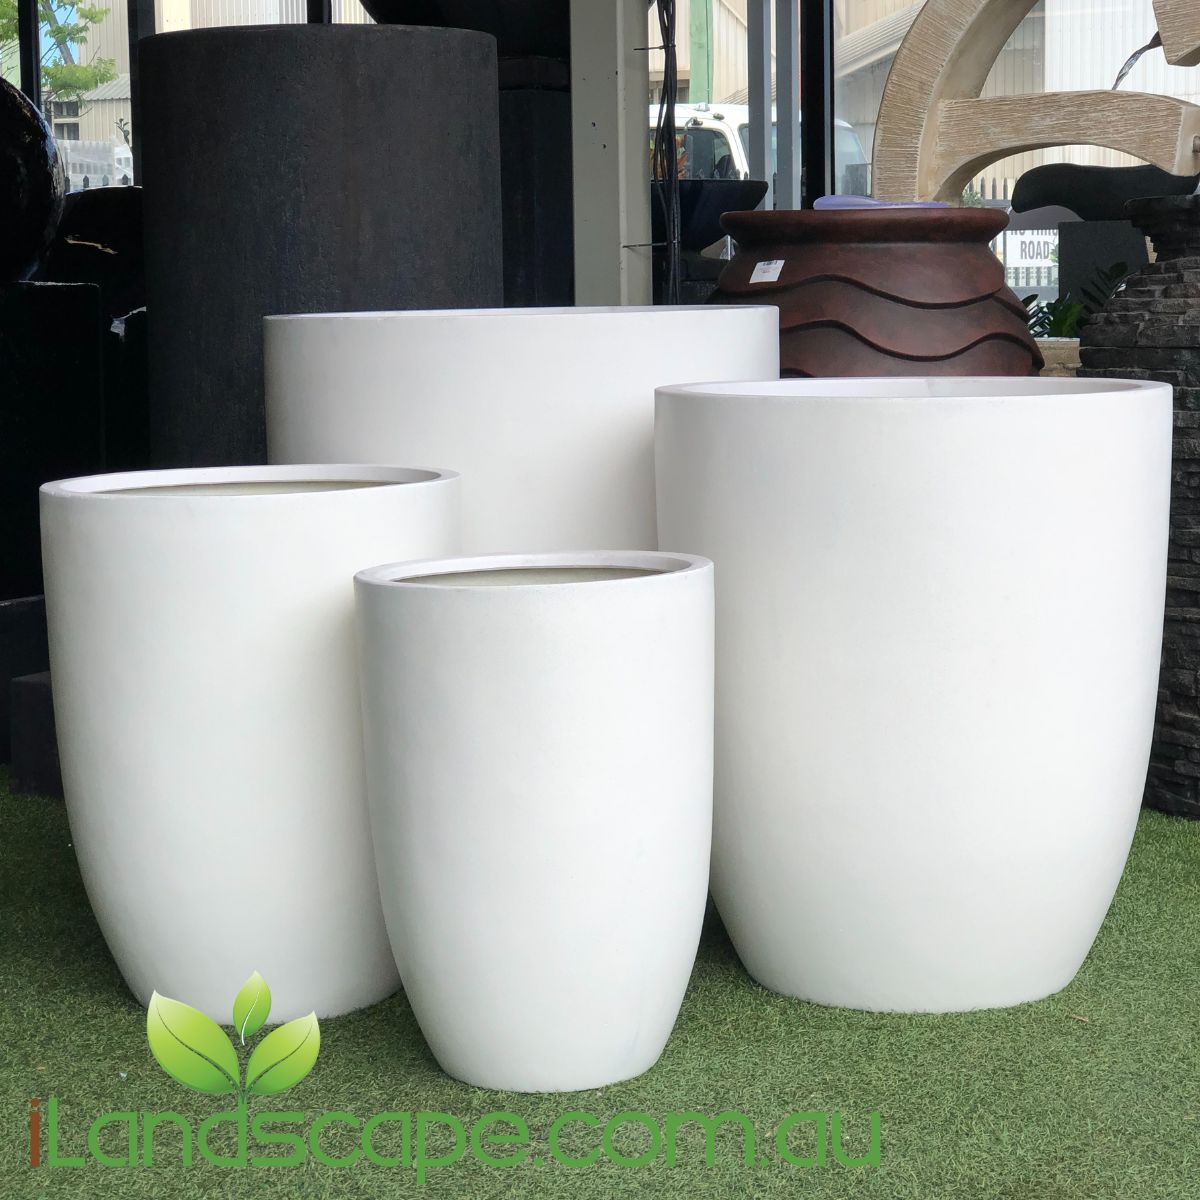 Chambers U Pot by Modstone is a designer range of strong, durable lightweight planters with a stylish terrazzo appearance. Modstone Pots are made using a similar production process to our  Urbanlite range, but also contain a coarse stone grit exterior layer which can be treated to produce a variety of attractive polished and rough finishes